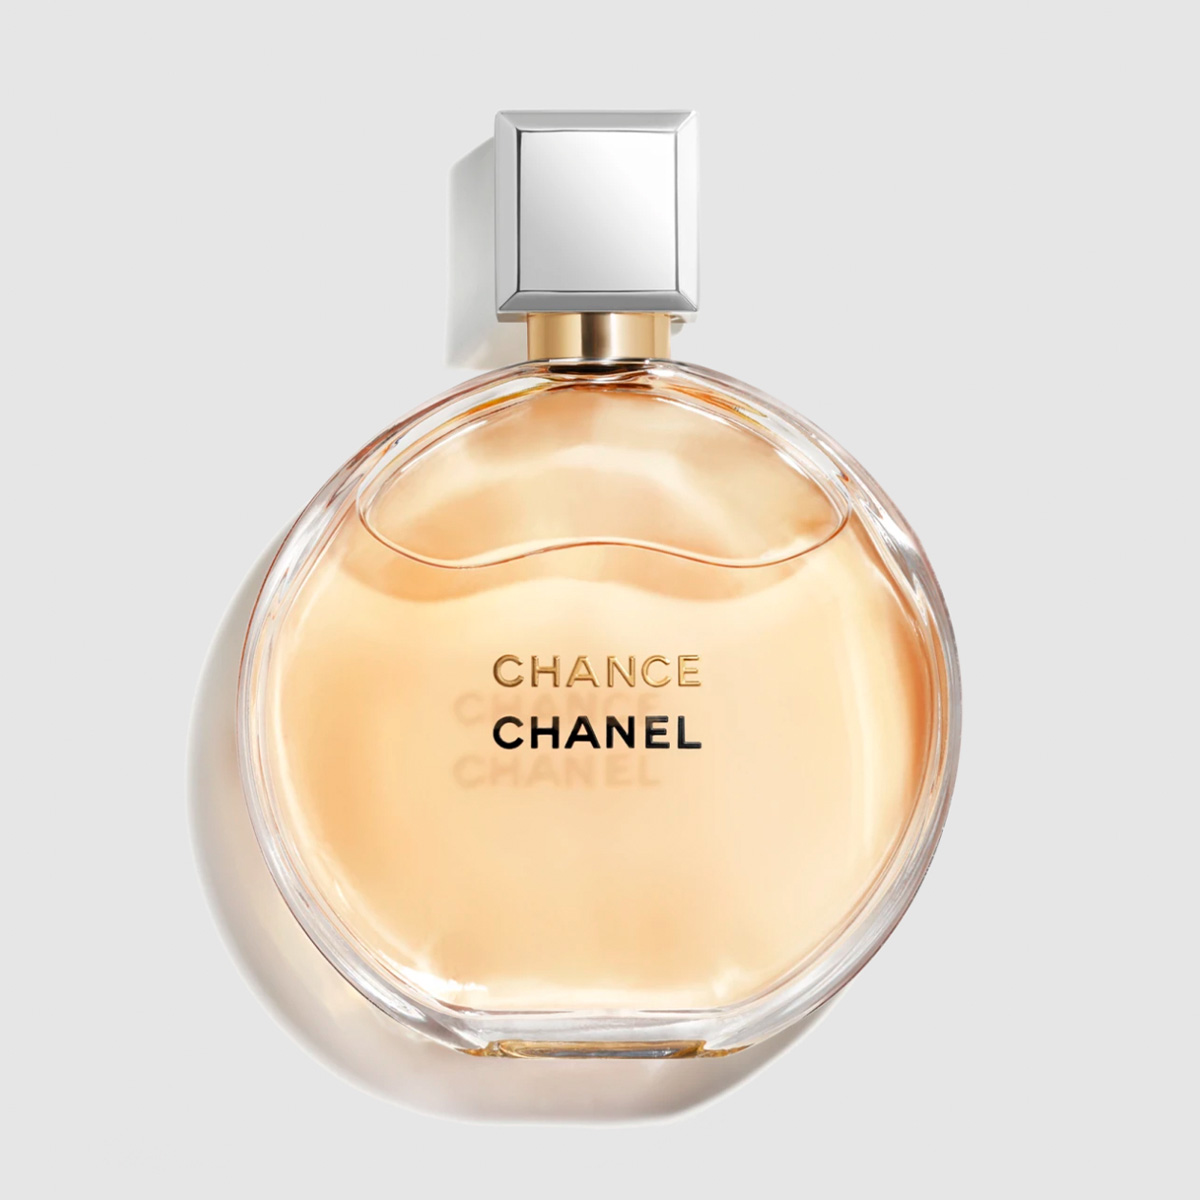 The Top 5 Best Chanel Perfumes of All Time | Who What Wear